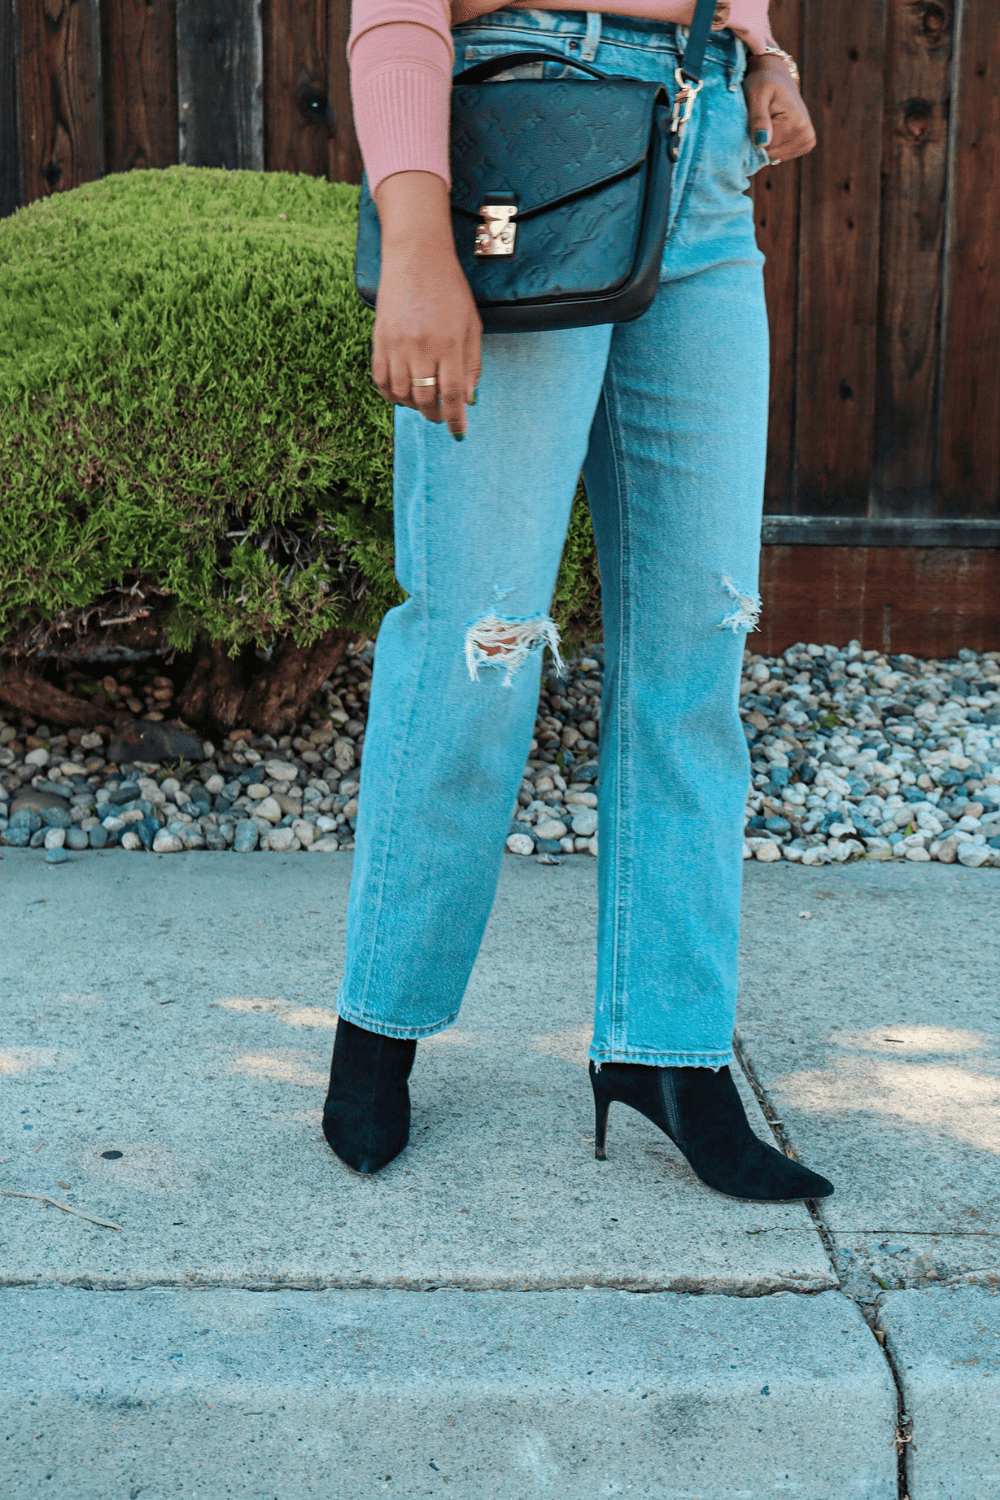 Wearing Closed Ankle Boots with Straight Leg jeans